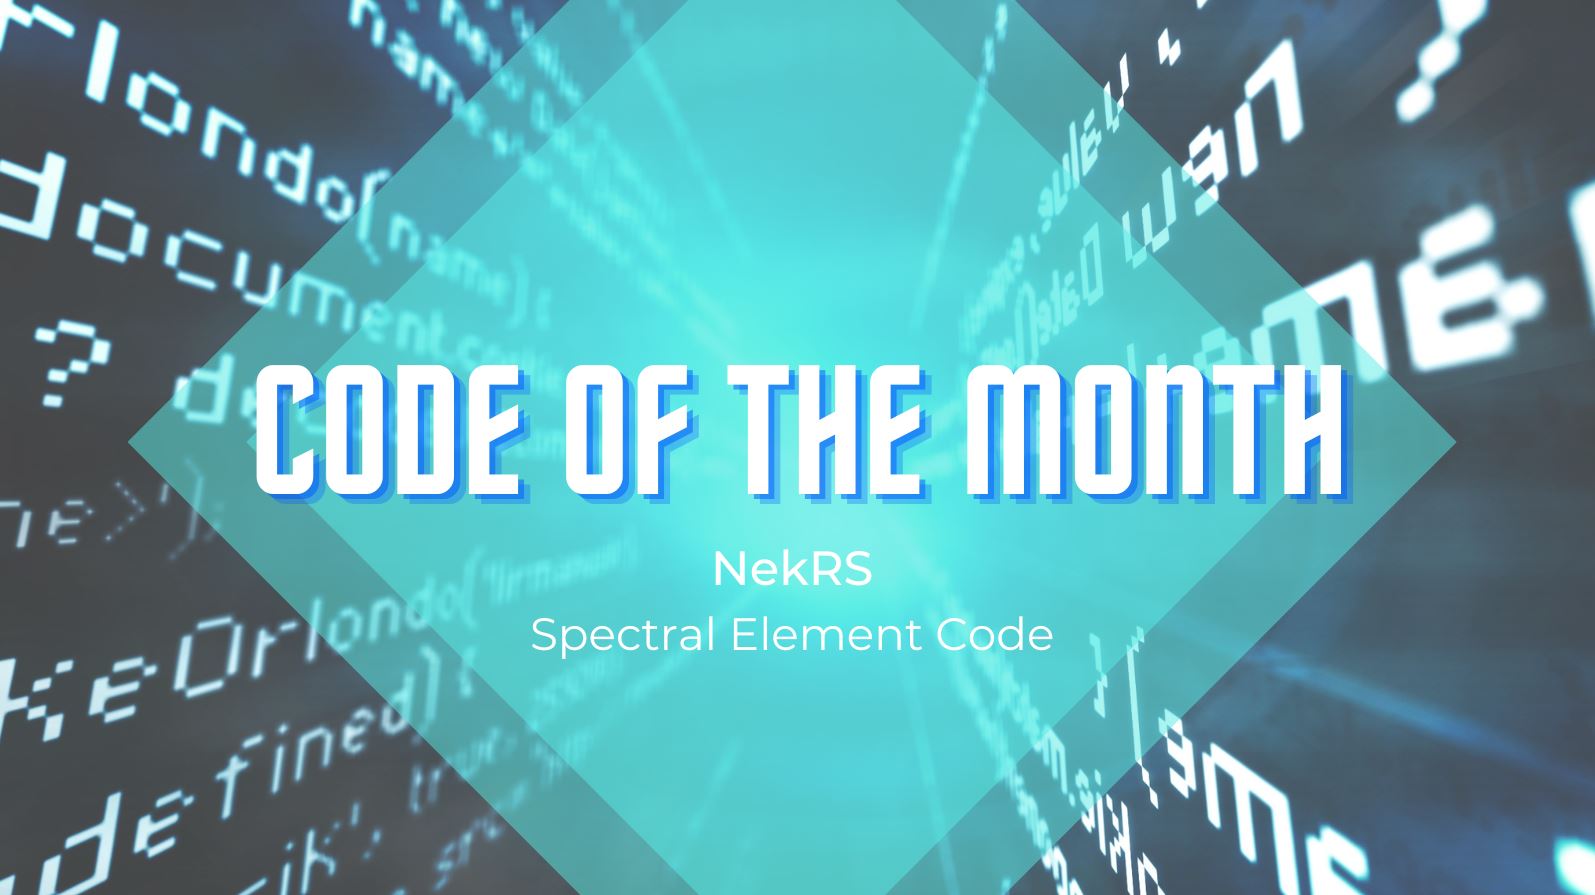 Code of the Month Vol. 3 – NekRS, September 26th at 11:00 CEST, online